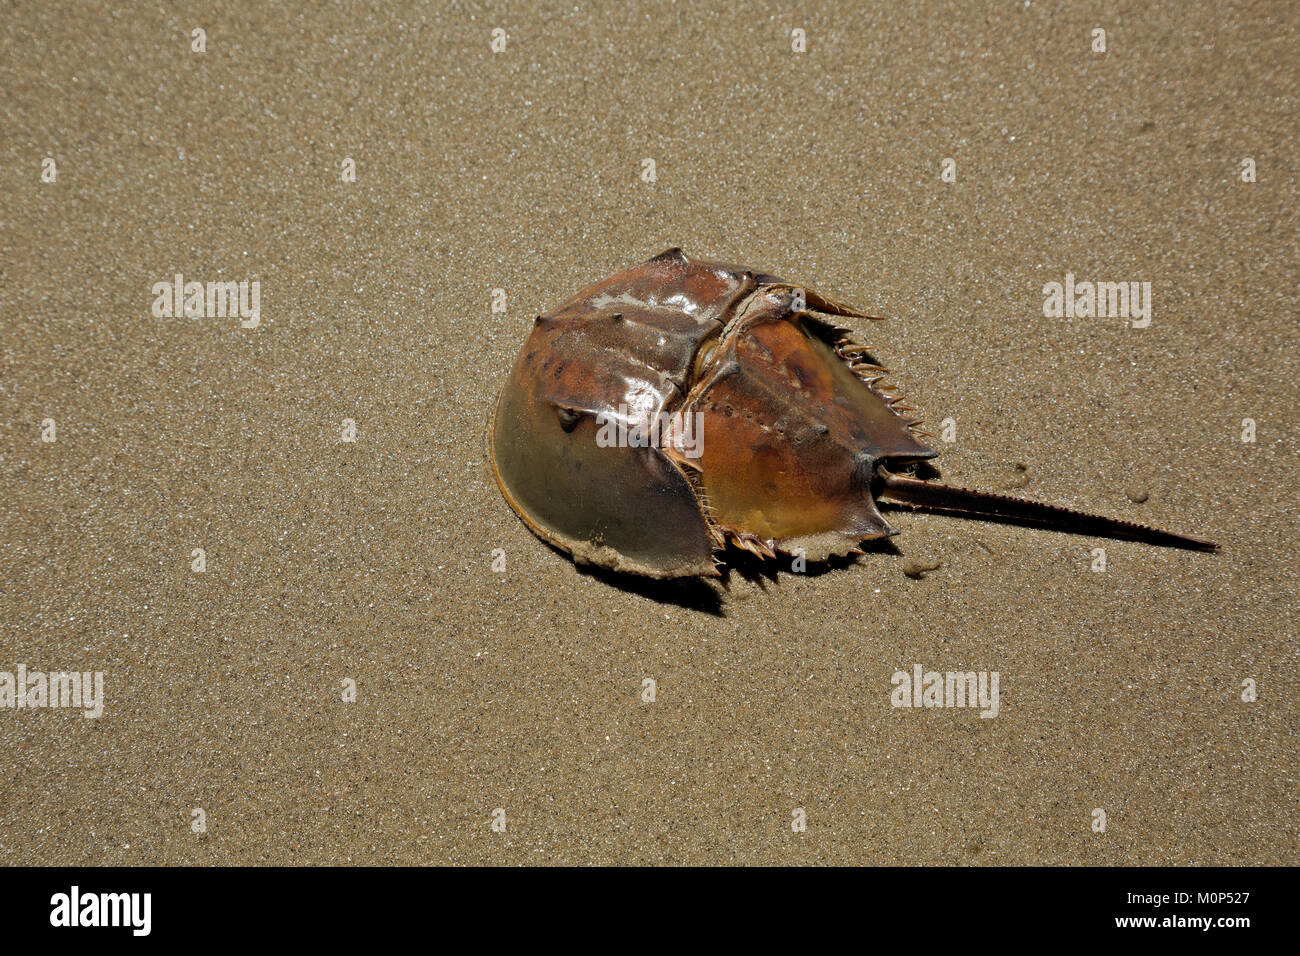 NC01411-00...NORTH CAROLINA - The hard carapace of a horseshoe crab found along the sandy beaches of the Outer Banks. Stock Photo